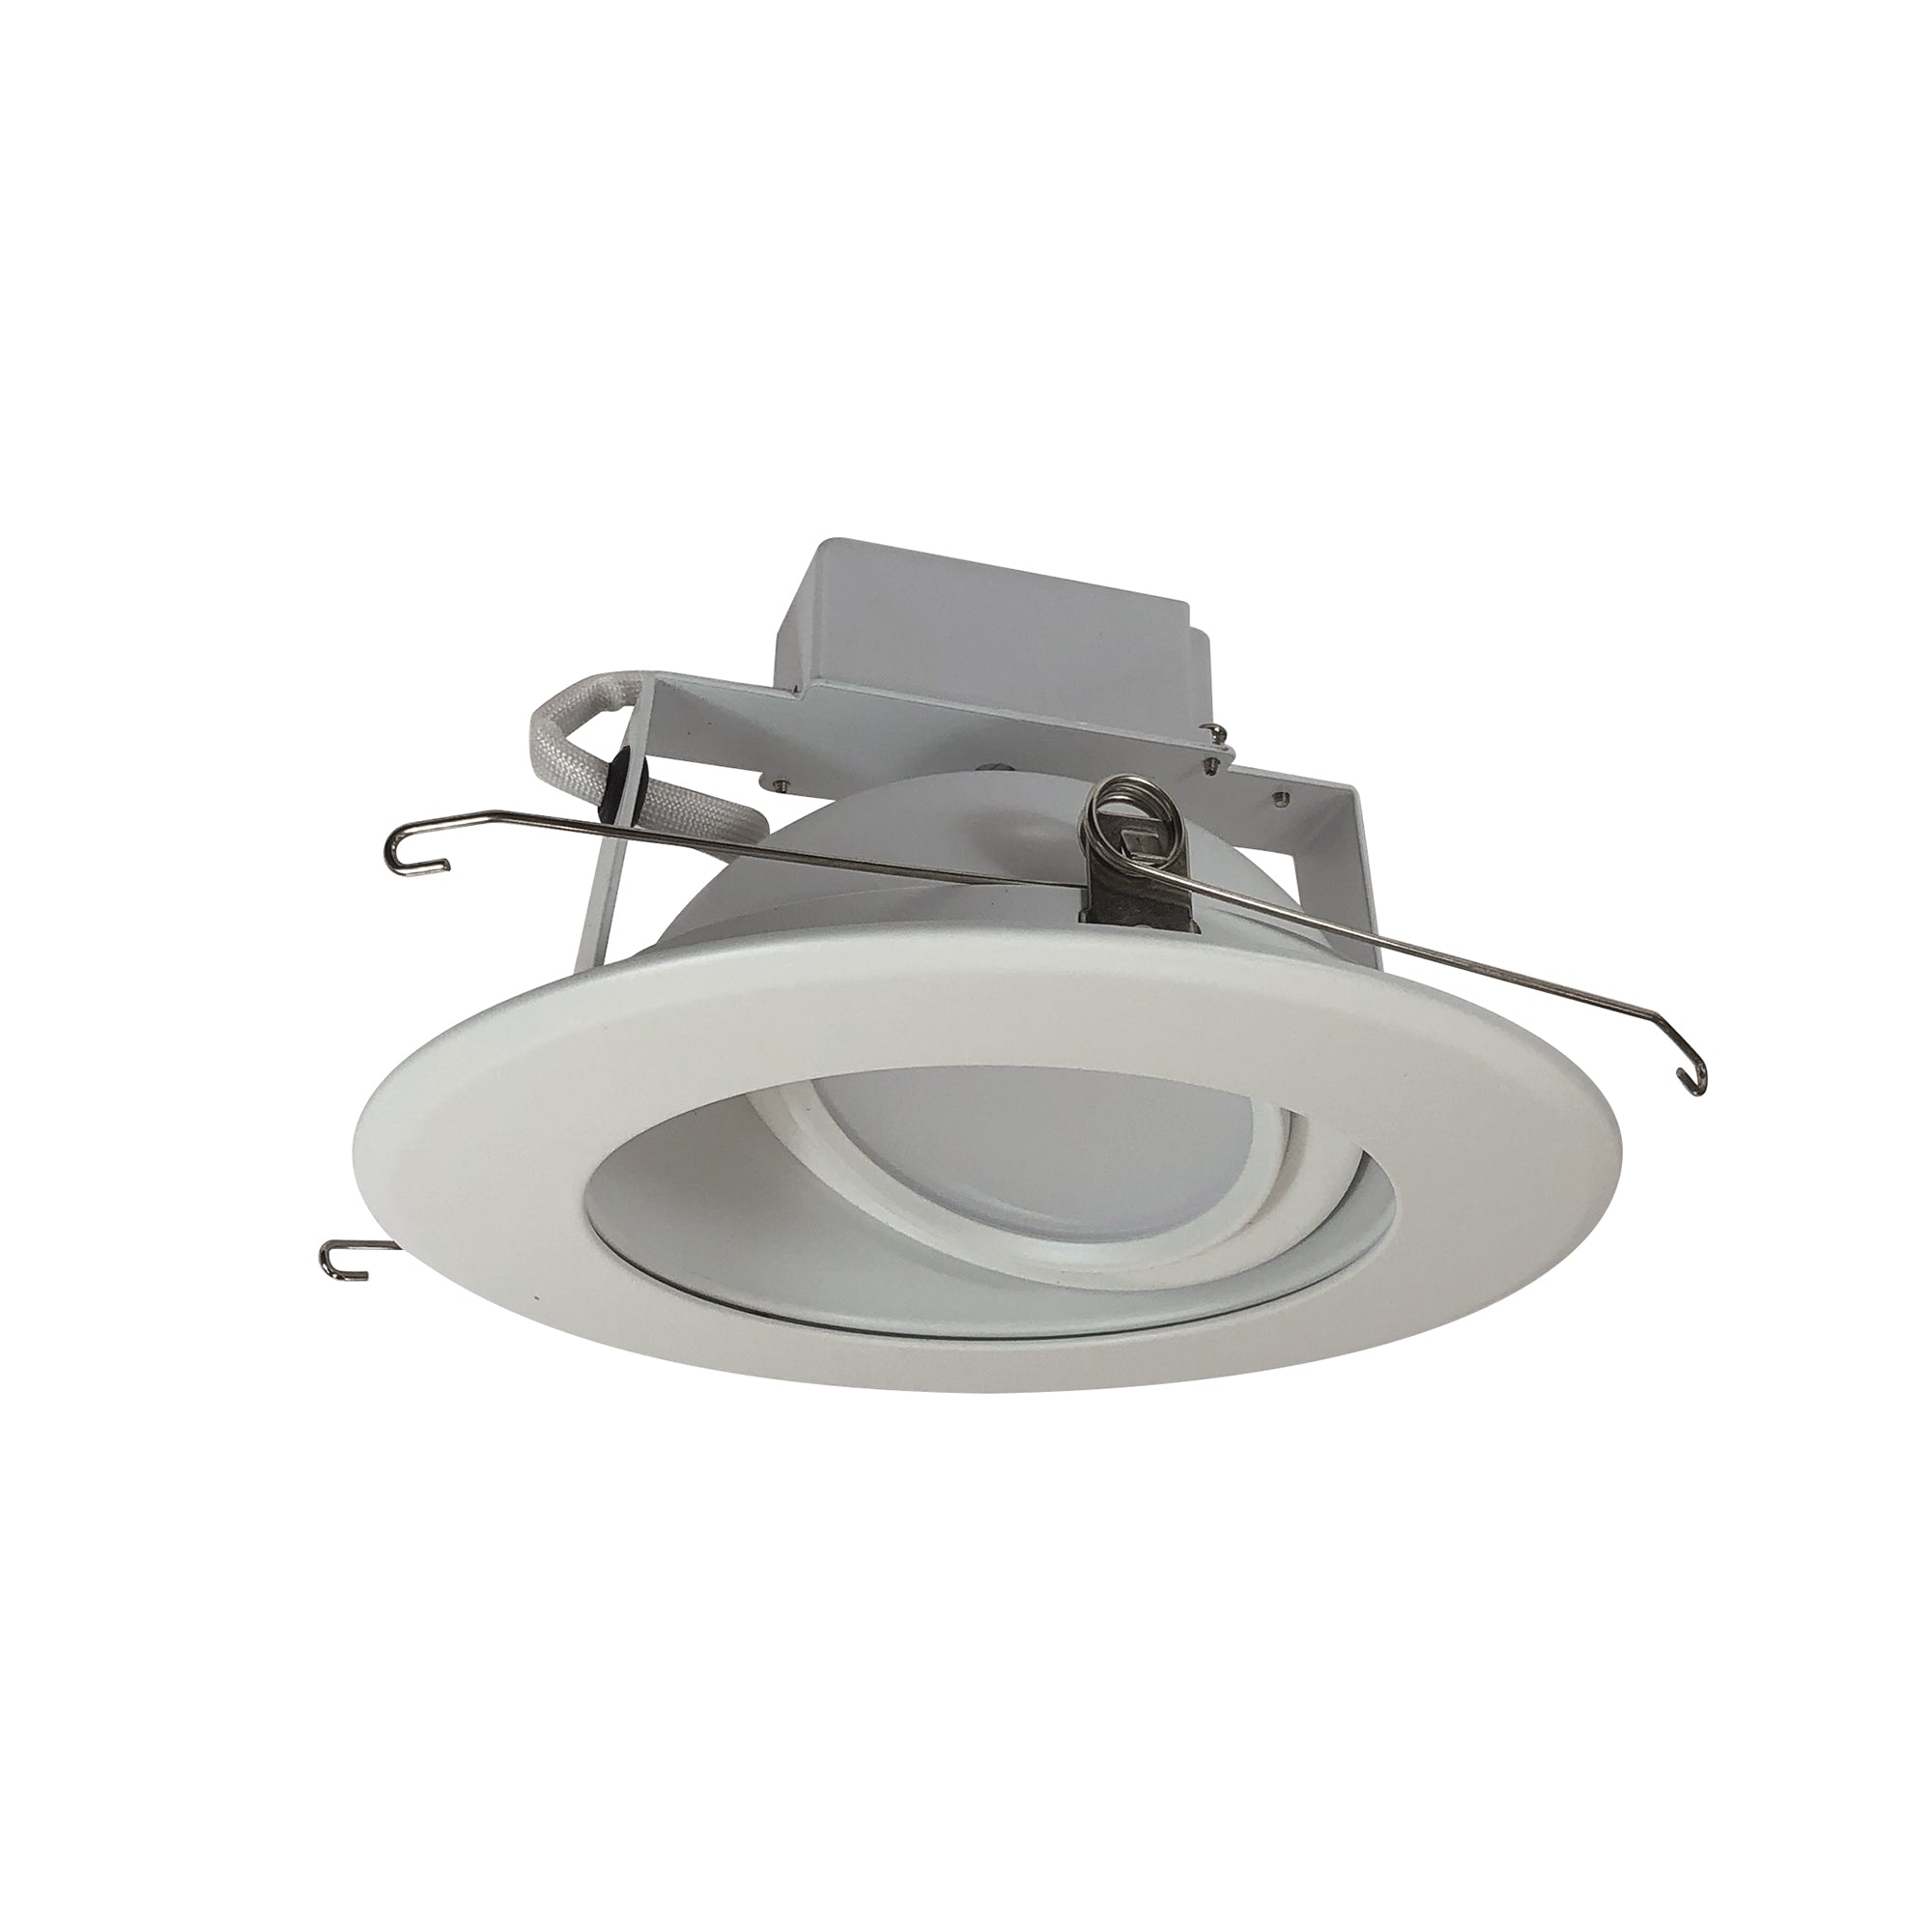 Nora Lighting LE60 - NLCBC-66930XWWLE4 - Recessed - White